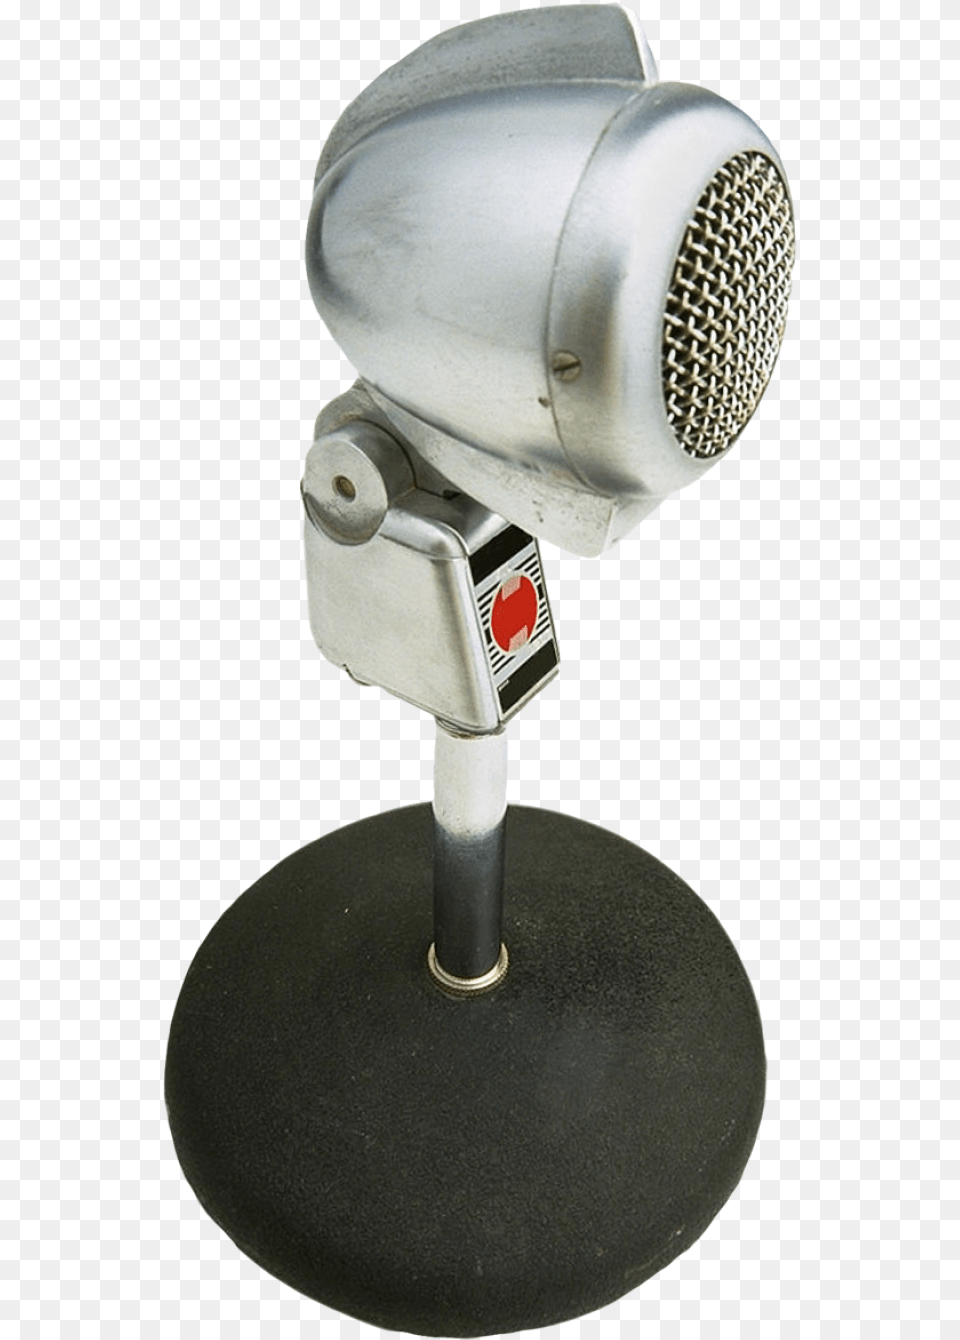 Mic Image Portable Network Graphics, Electrical Device, Microphone Free Transparent Png